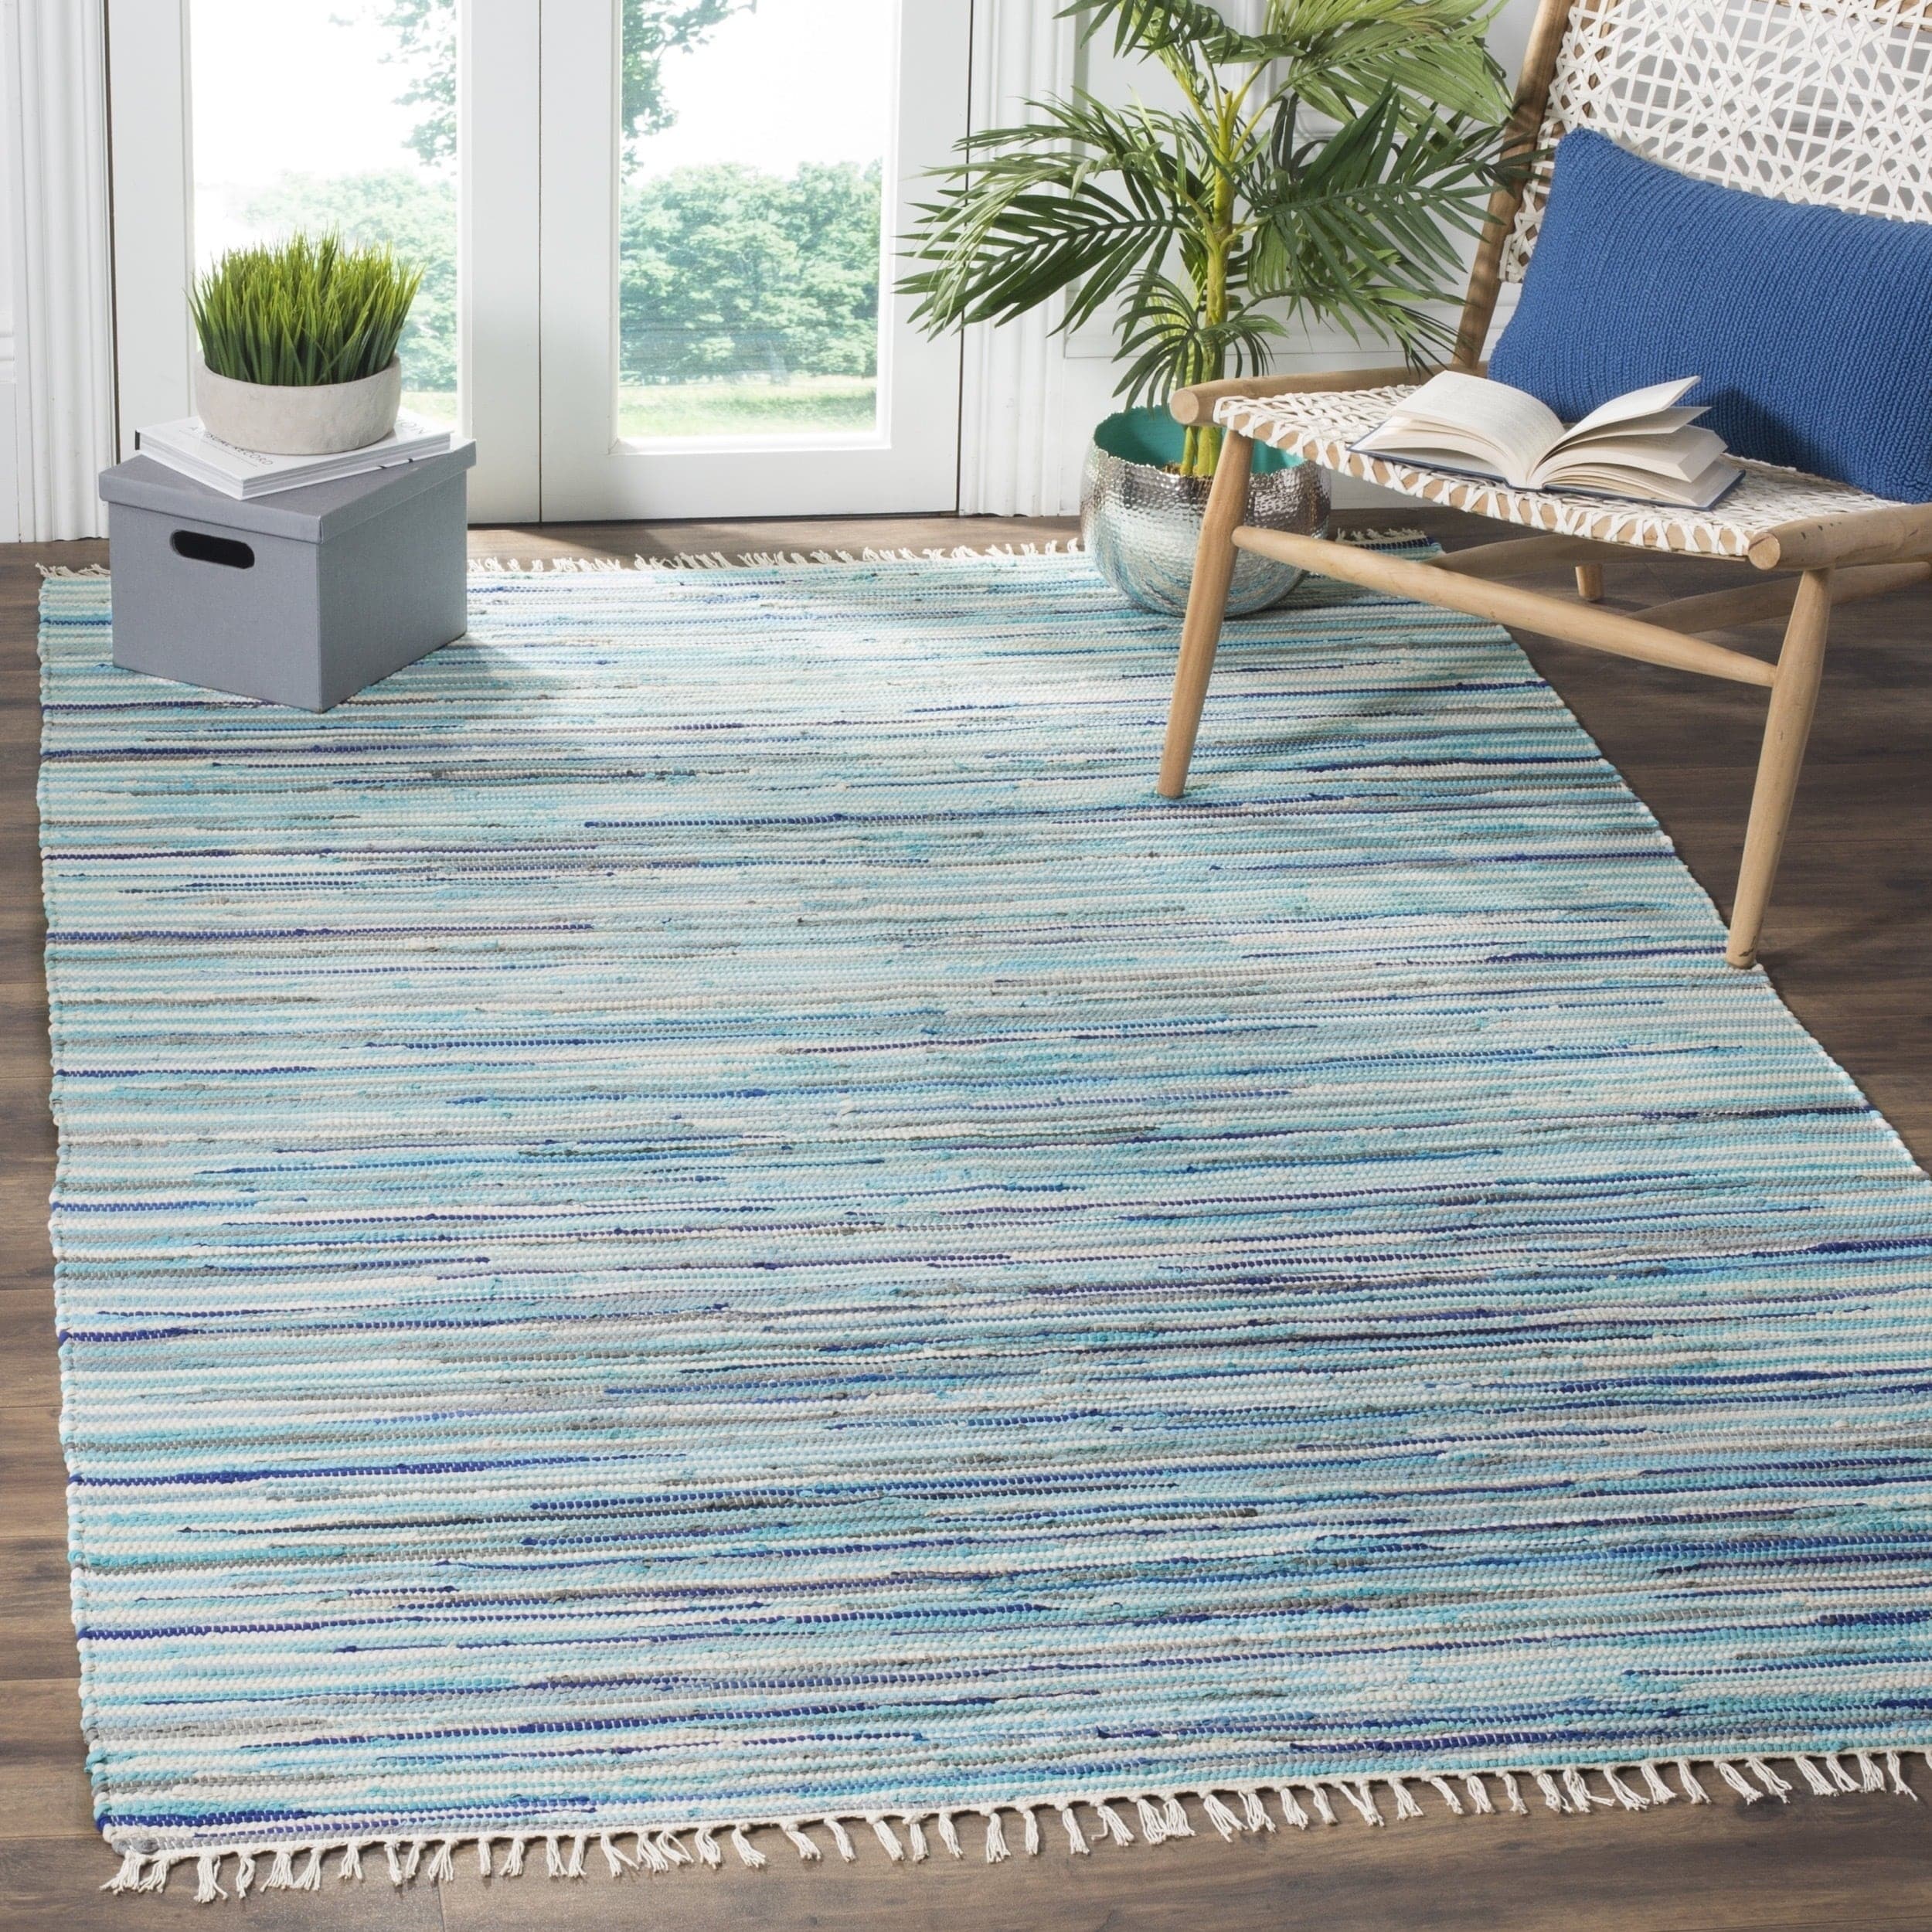 Safavieh Hand-Woven Indoor/Outdoor Reversible Multicolor Braided Area Rug -  6' x 9' - Bed Bath & Beyond - 21044404